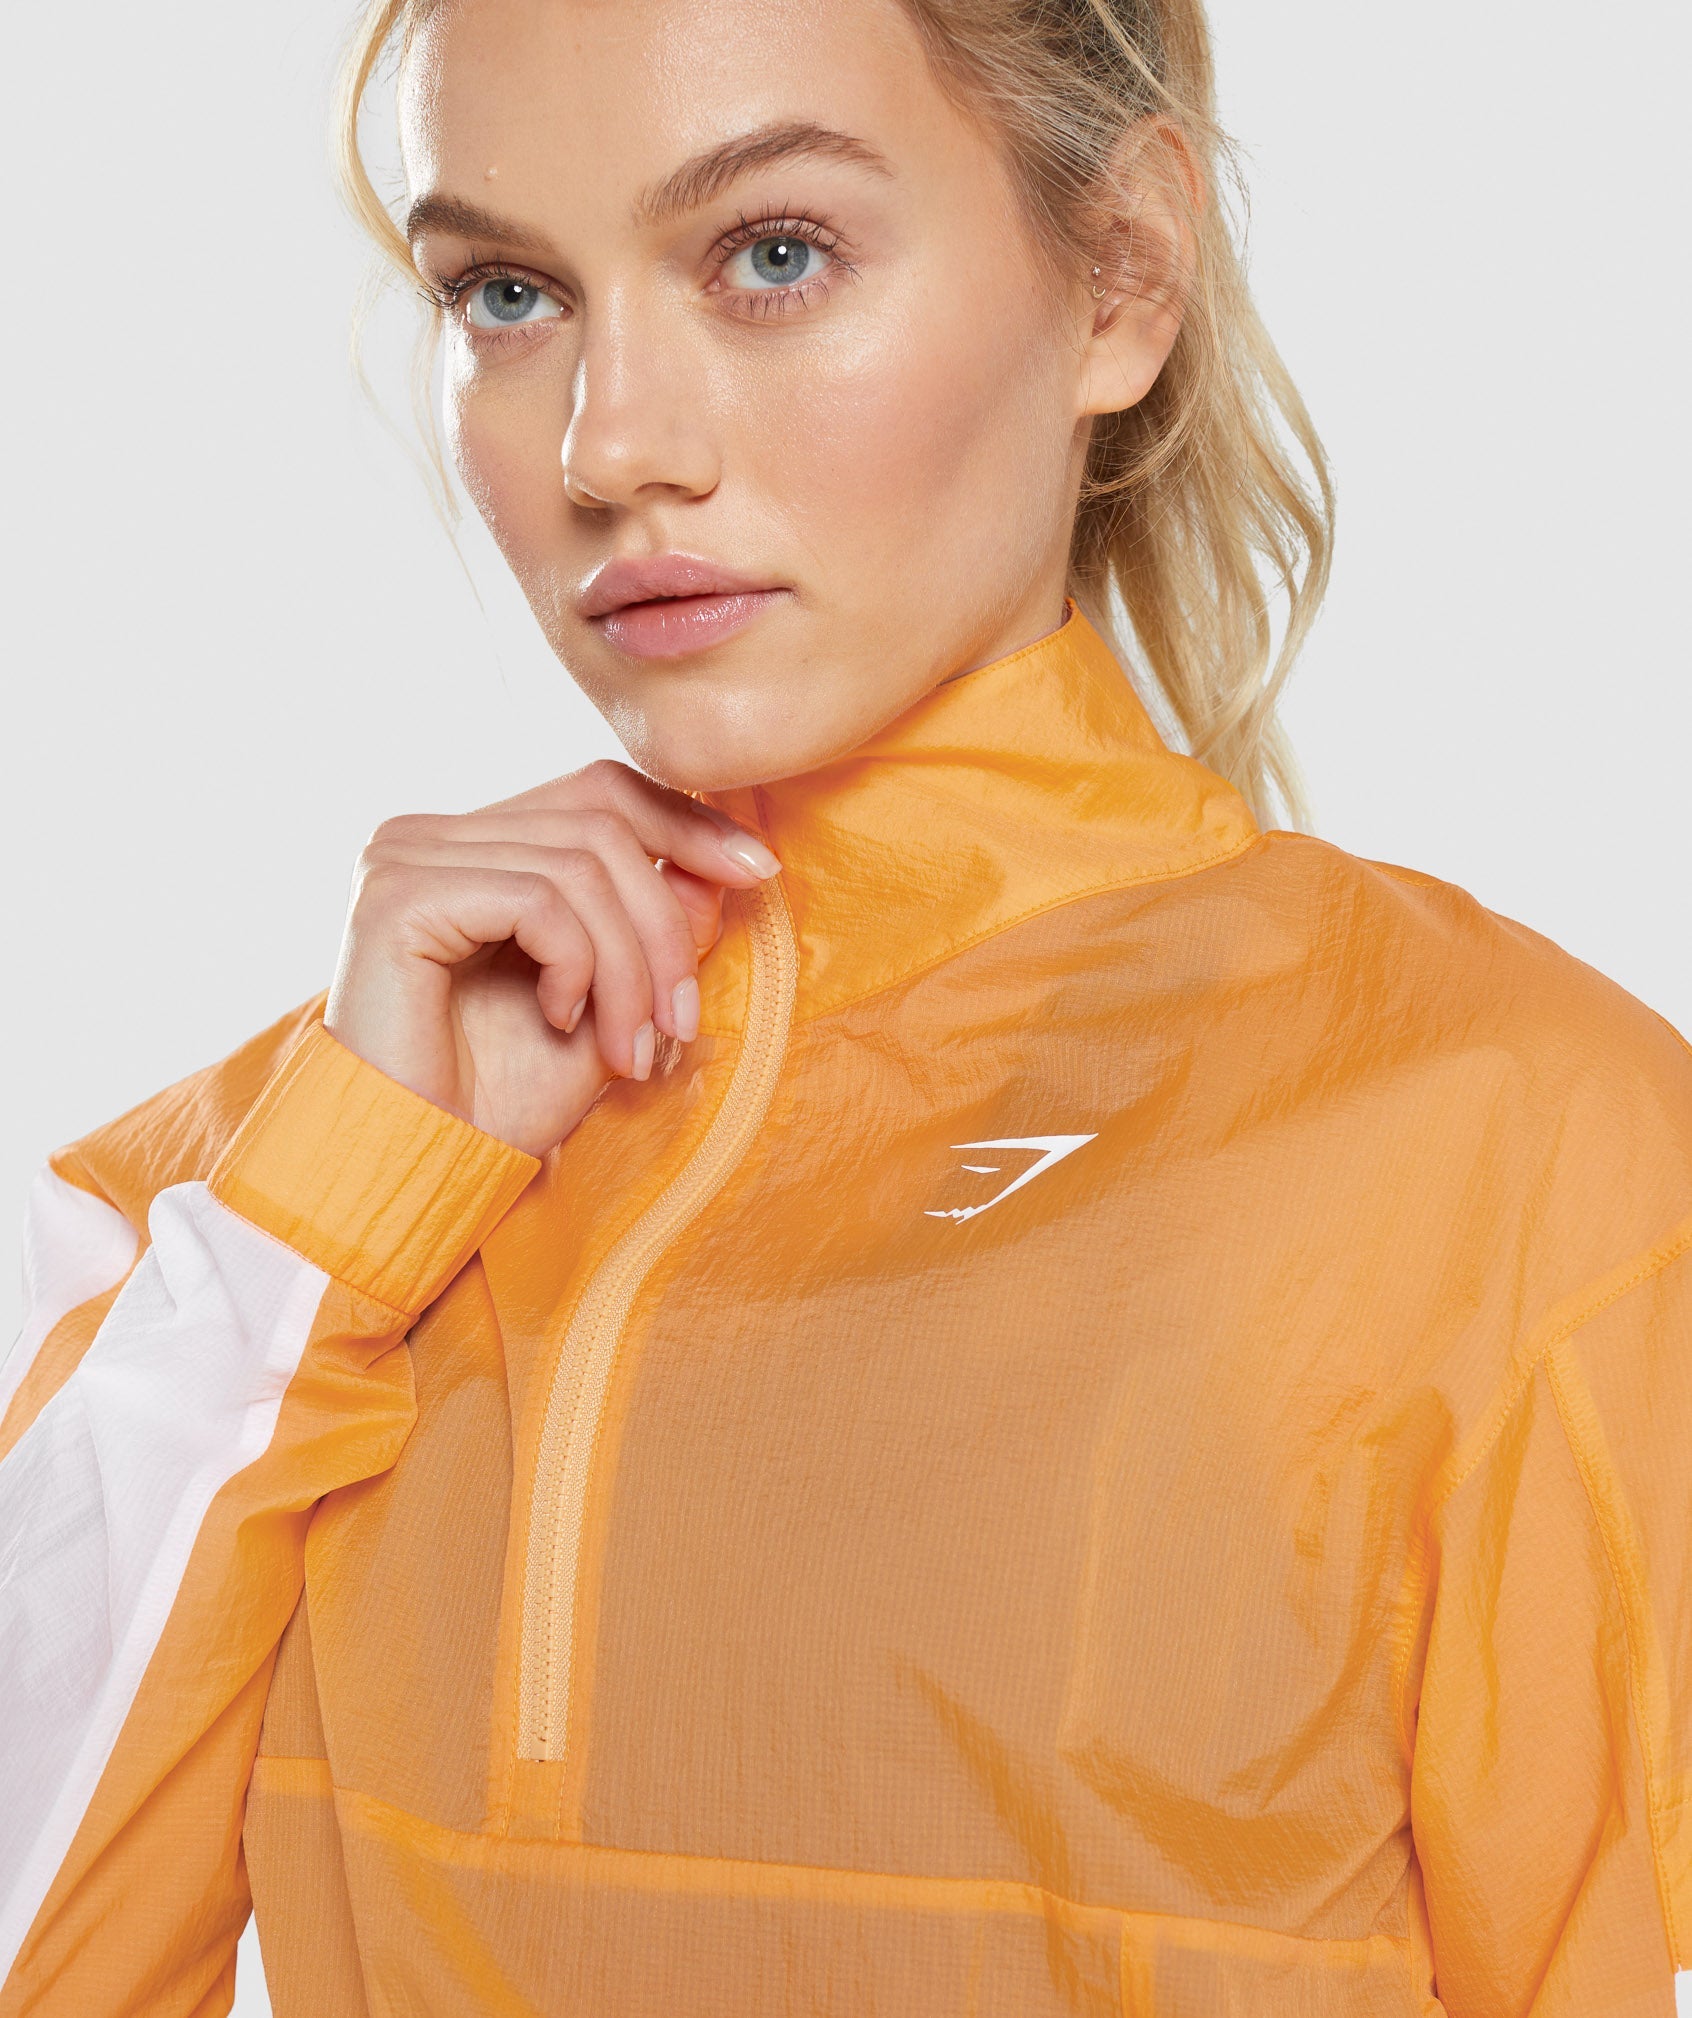 Pulse Woven Jacket in Apricot Orange/White - view 5